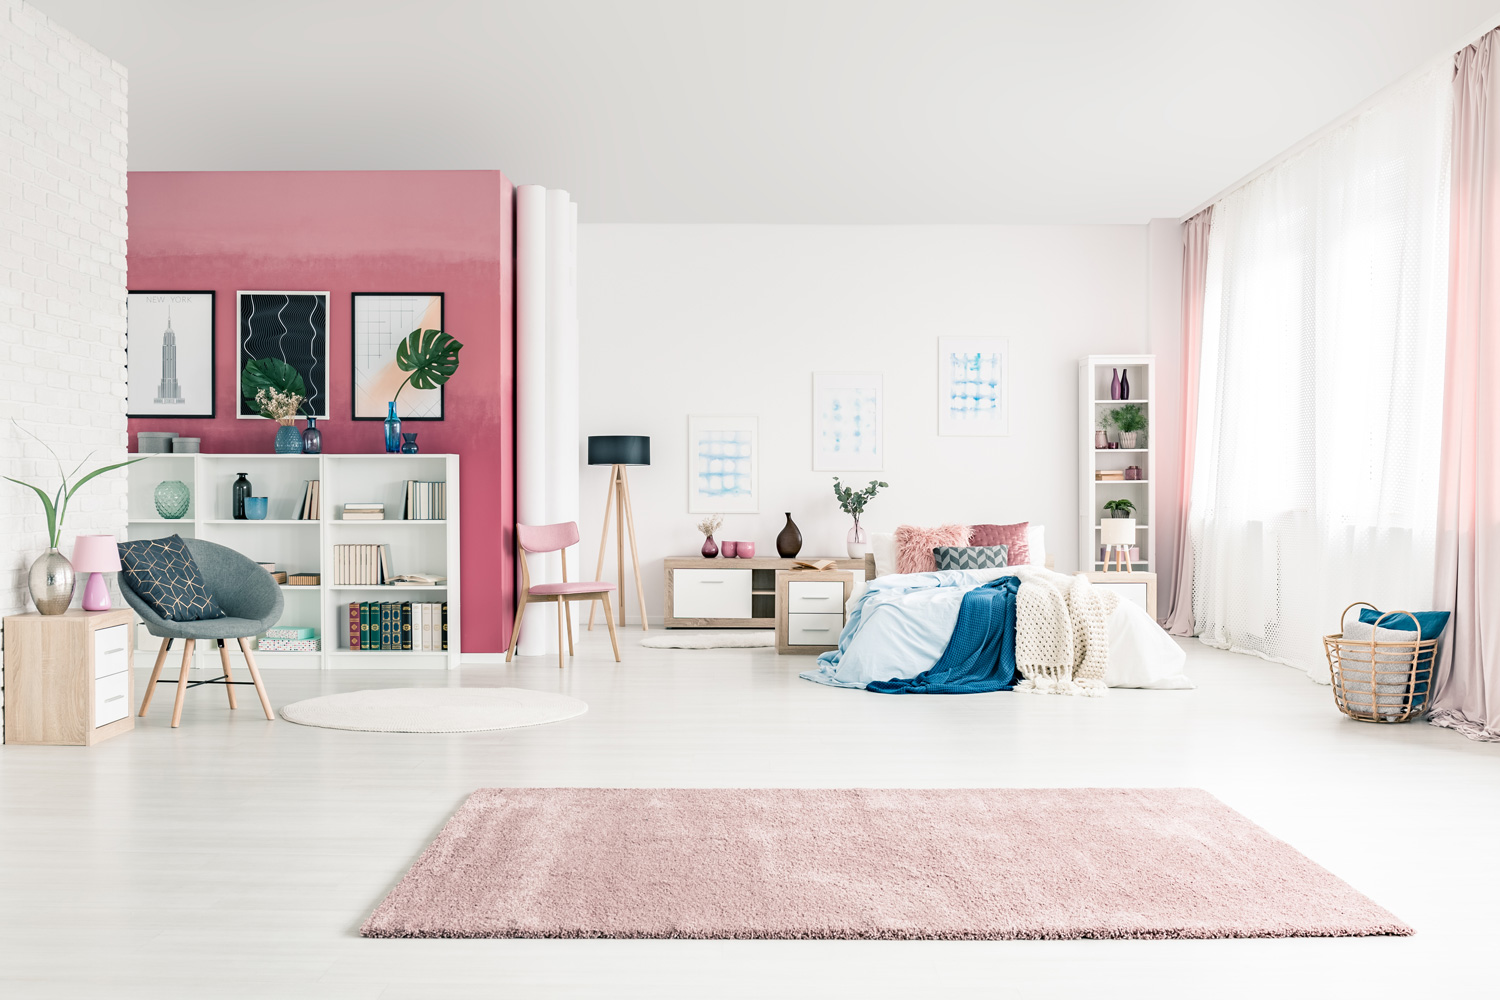 Open space bedroom interior with big rug, cozy bed, pink and white walls, chairs, posters, basket, pink drapes and bookcases